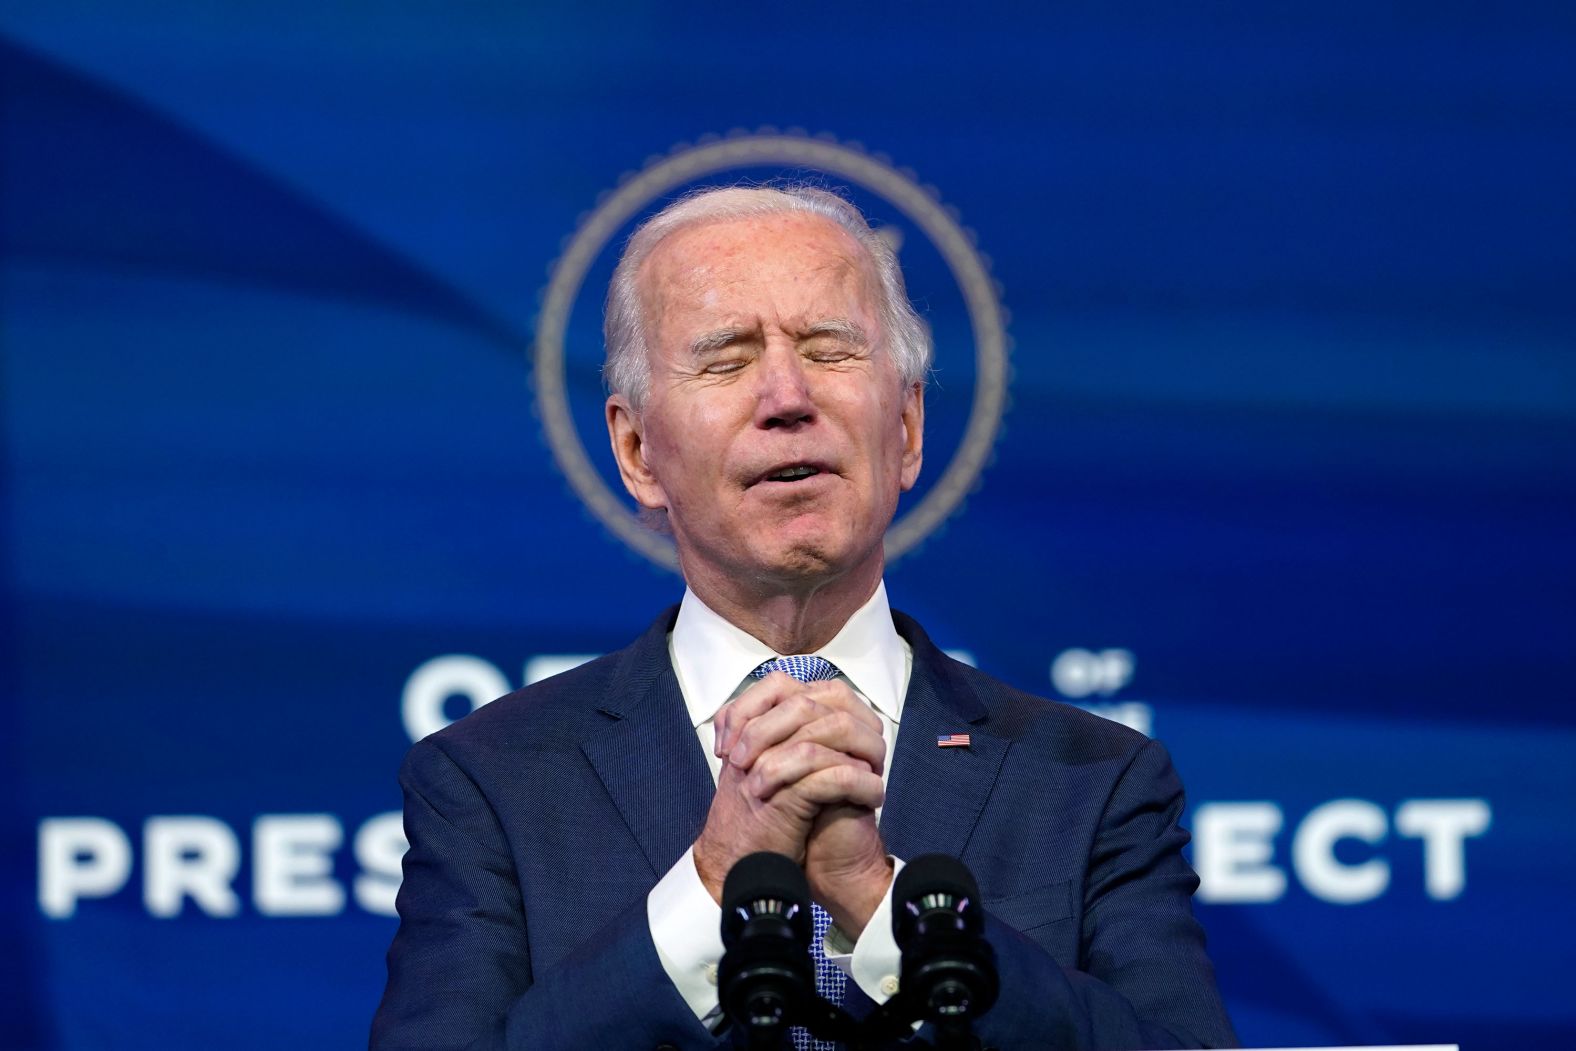 Biden speaks in Wilmington, Delaware, <a href="index.php?page=&url=https%3A%2F%2Fwww.cnn.com%2F2021%2F01%2F07%2Fpolitics%2Fbiden-merrick-garland-justice-nominees%2Findex.html" target="_blank">after the US Capitol was breached</a> in January 2021. Biden was planning to deliver a speech on the economy, but he scrapped his speech and instead addressed the chaos and violence in Washington, DC. He said the rioting amounted to an "unprecedented assault" on US democracy. "This is not dissent. It's disorder. It's chaos," he said. "It borders on sedition, and it must end now."